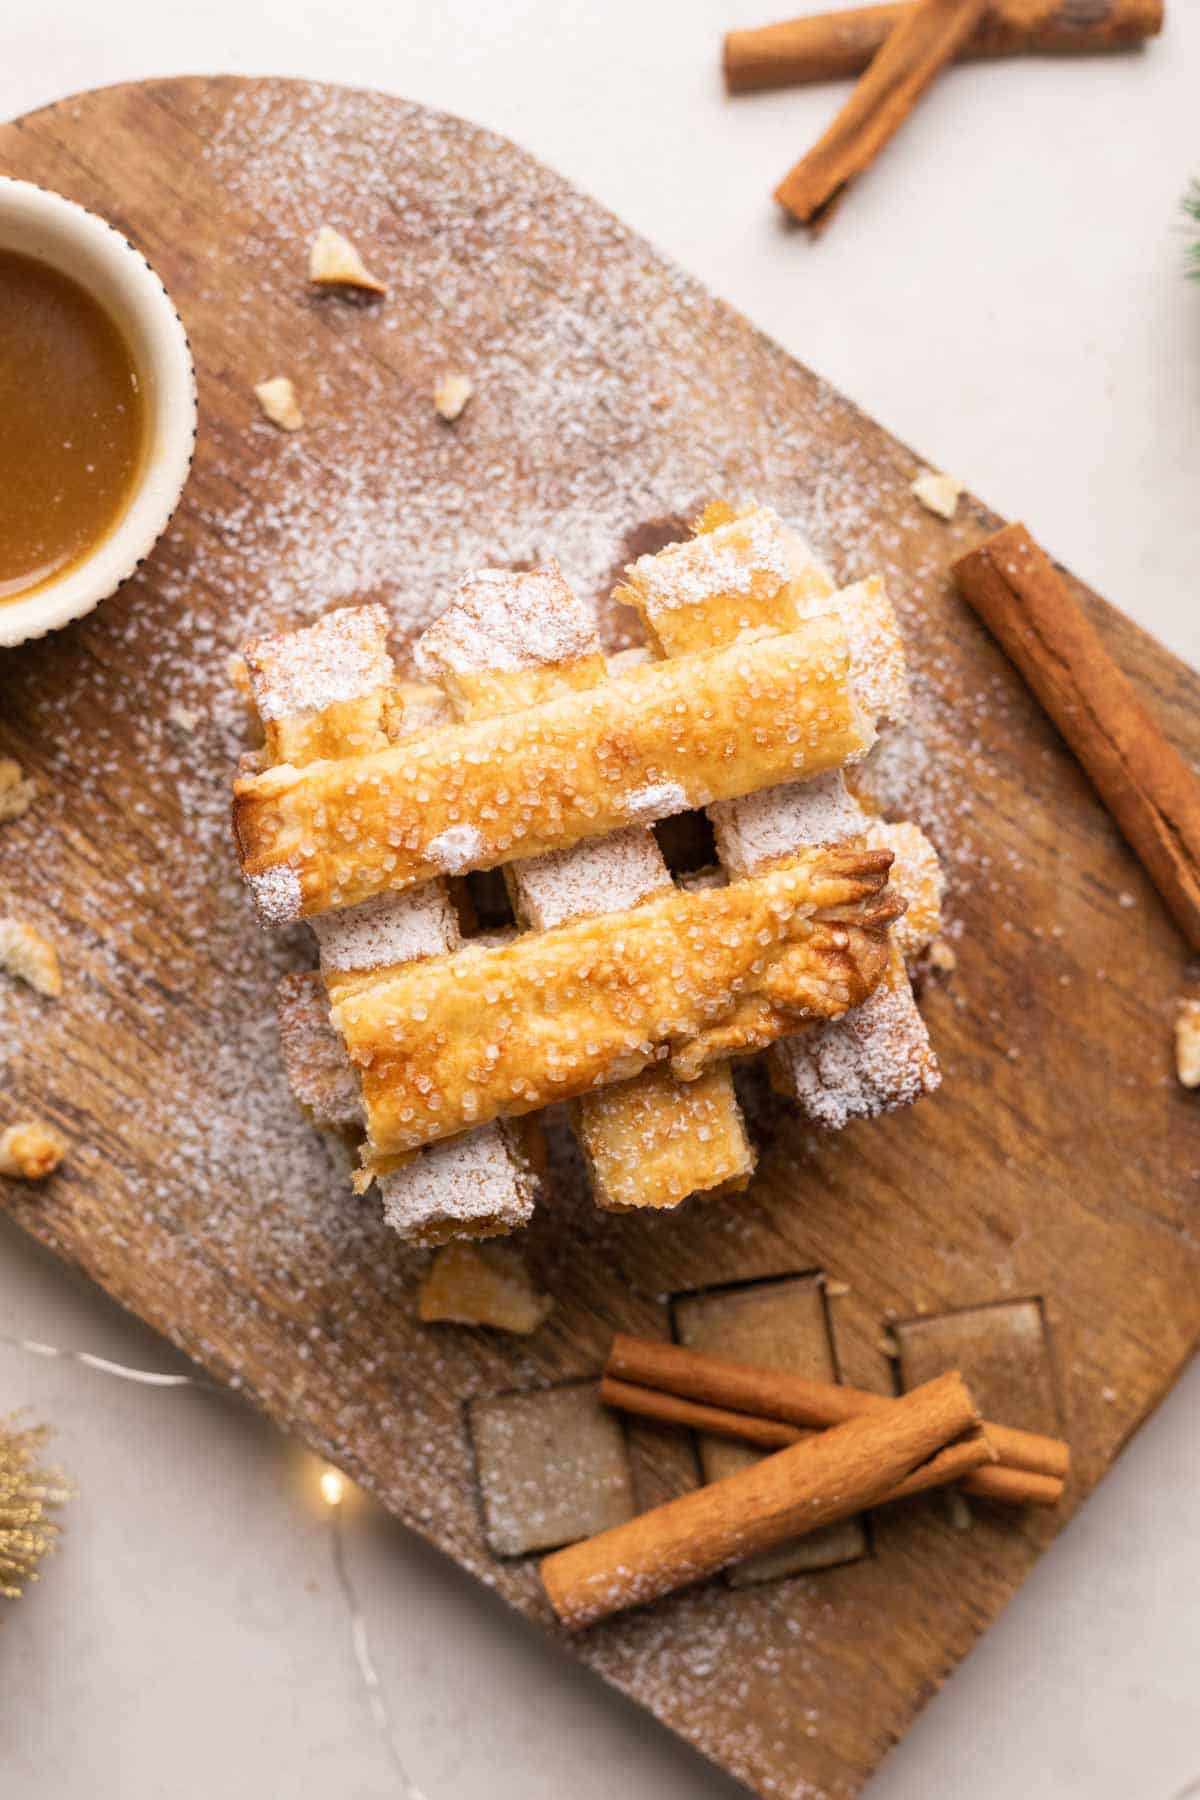 Apple Pie Fries stacked on a wooden workbench with salted caramel sauce.